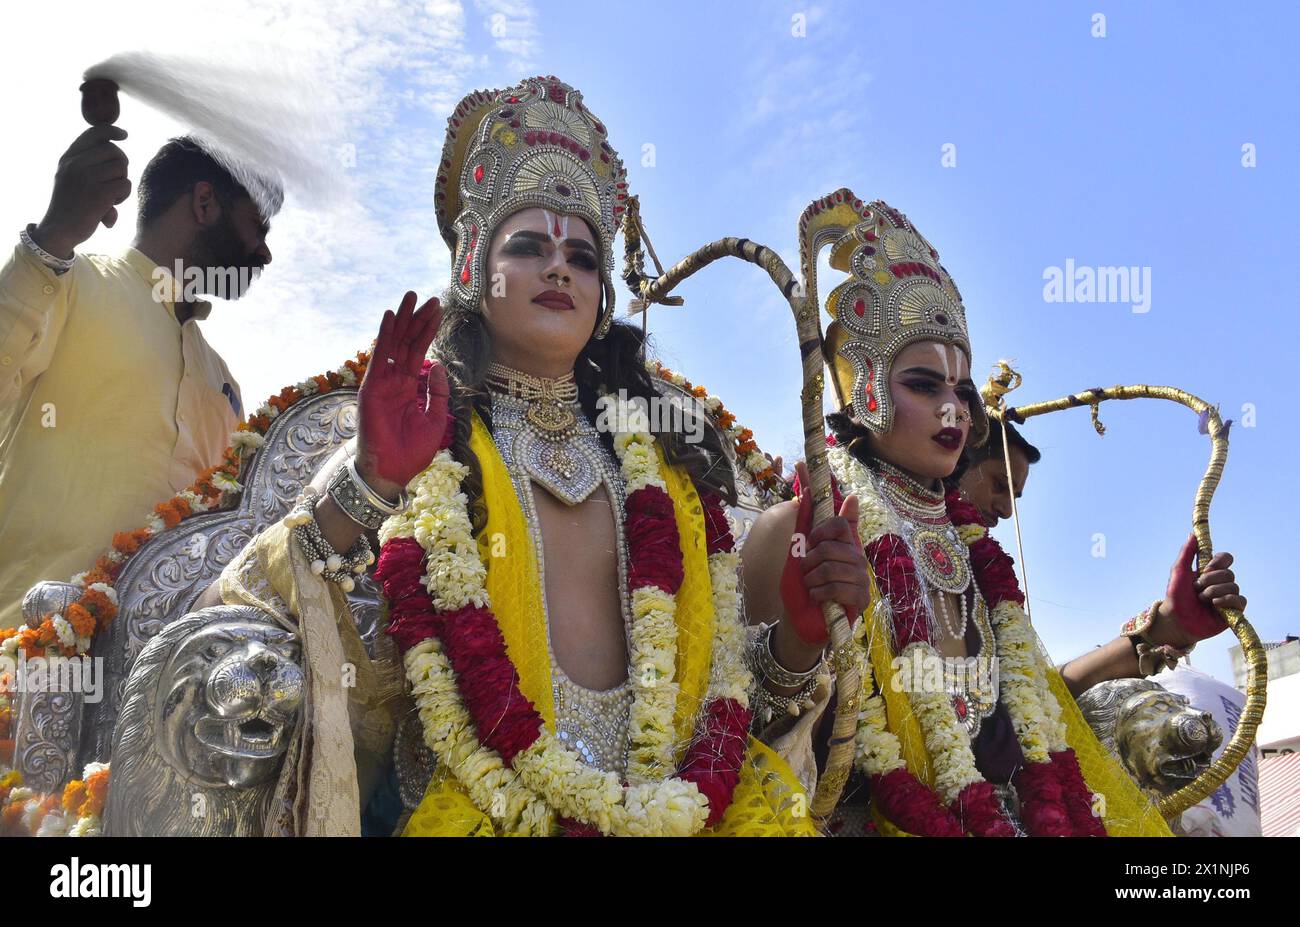 AMRITSAR, INDIA - APRIL 17: Devotees dressed as Hindu deities Rama (L) and Laxman (R) participate in a religious procession on the occasion of the Ram Navami at Durgiana Temple on April 17, 2024 in Amritsar, India. (Photo by Sameer Sehgal/Hindustan Times/Sipa USA) Stock Photo